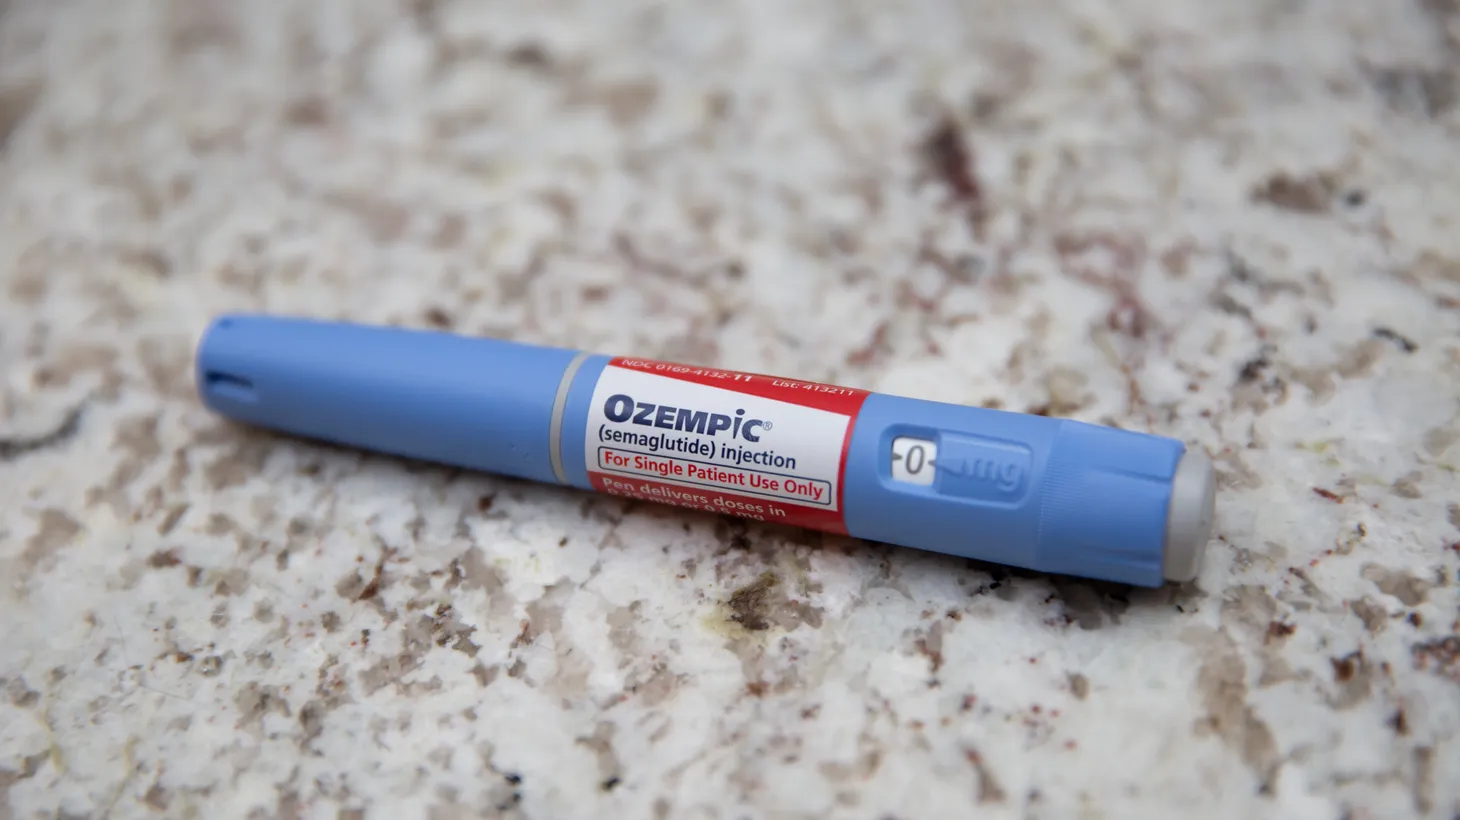 A photo illustration of an Ozempic pen sits on a table in Carmel, IN, Jan. 26, 2023. The diabetes drug Ozempic has seen supply chain issues due to off-label prescribing for weight loss.